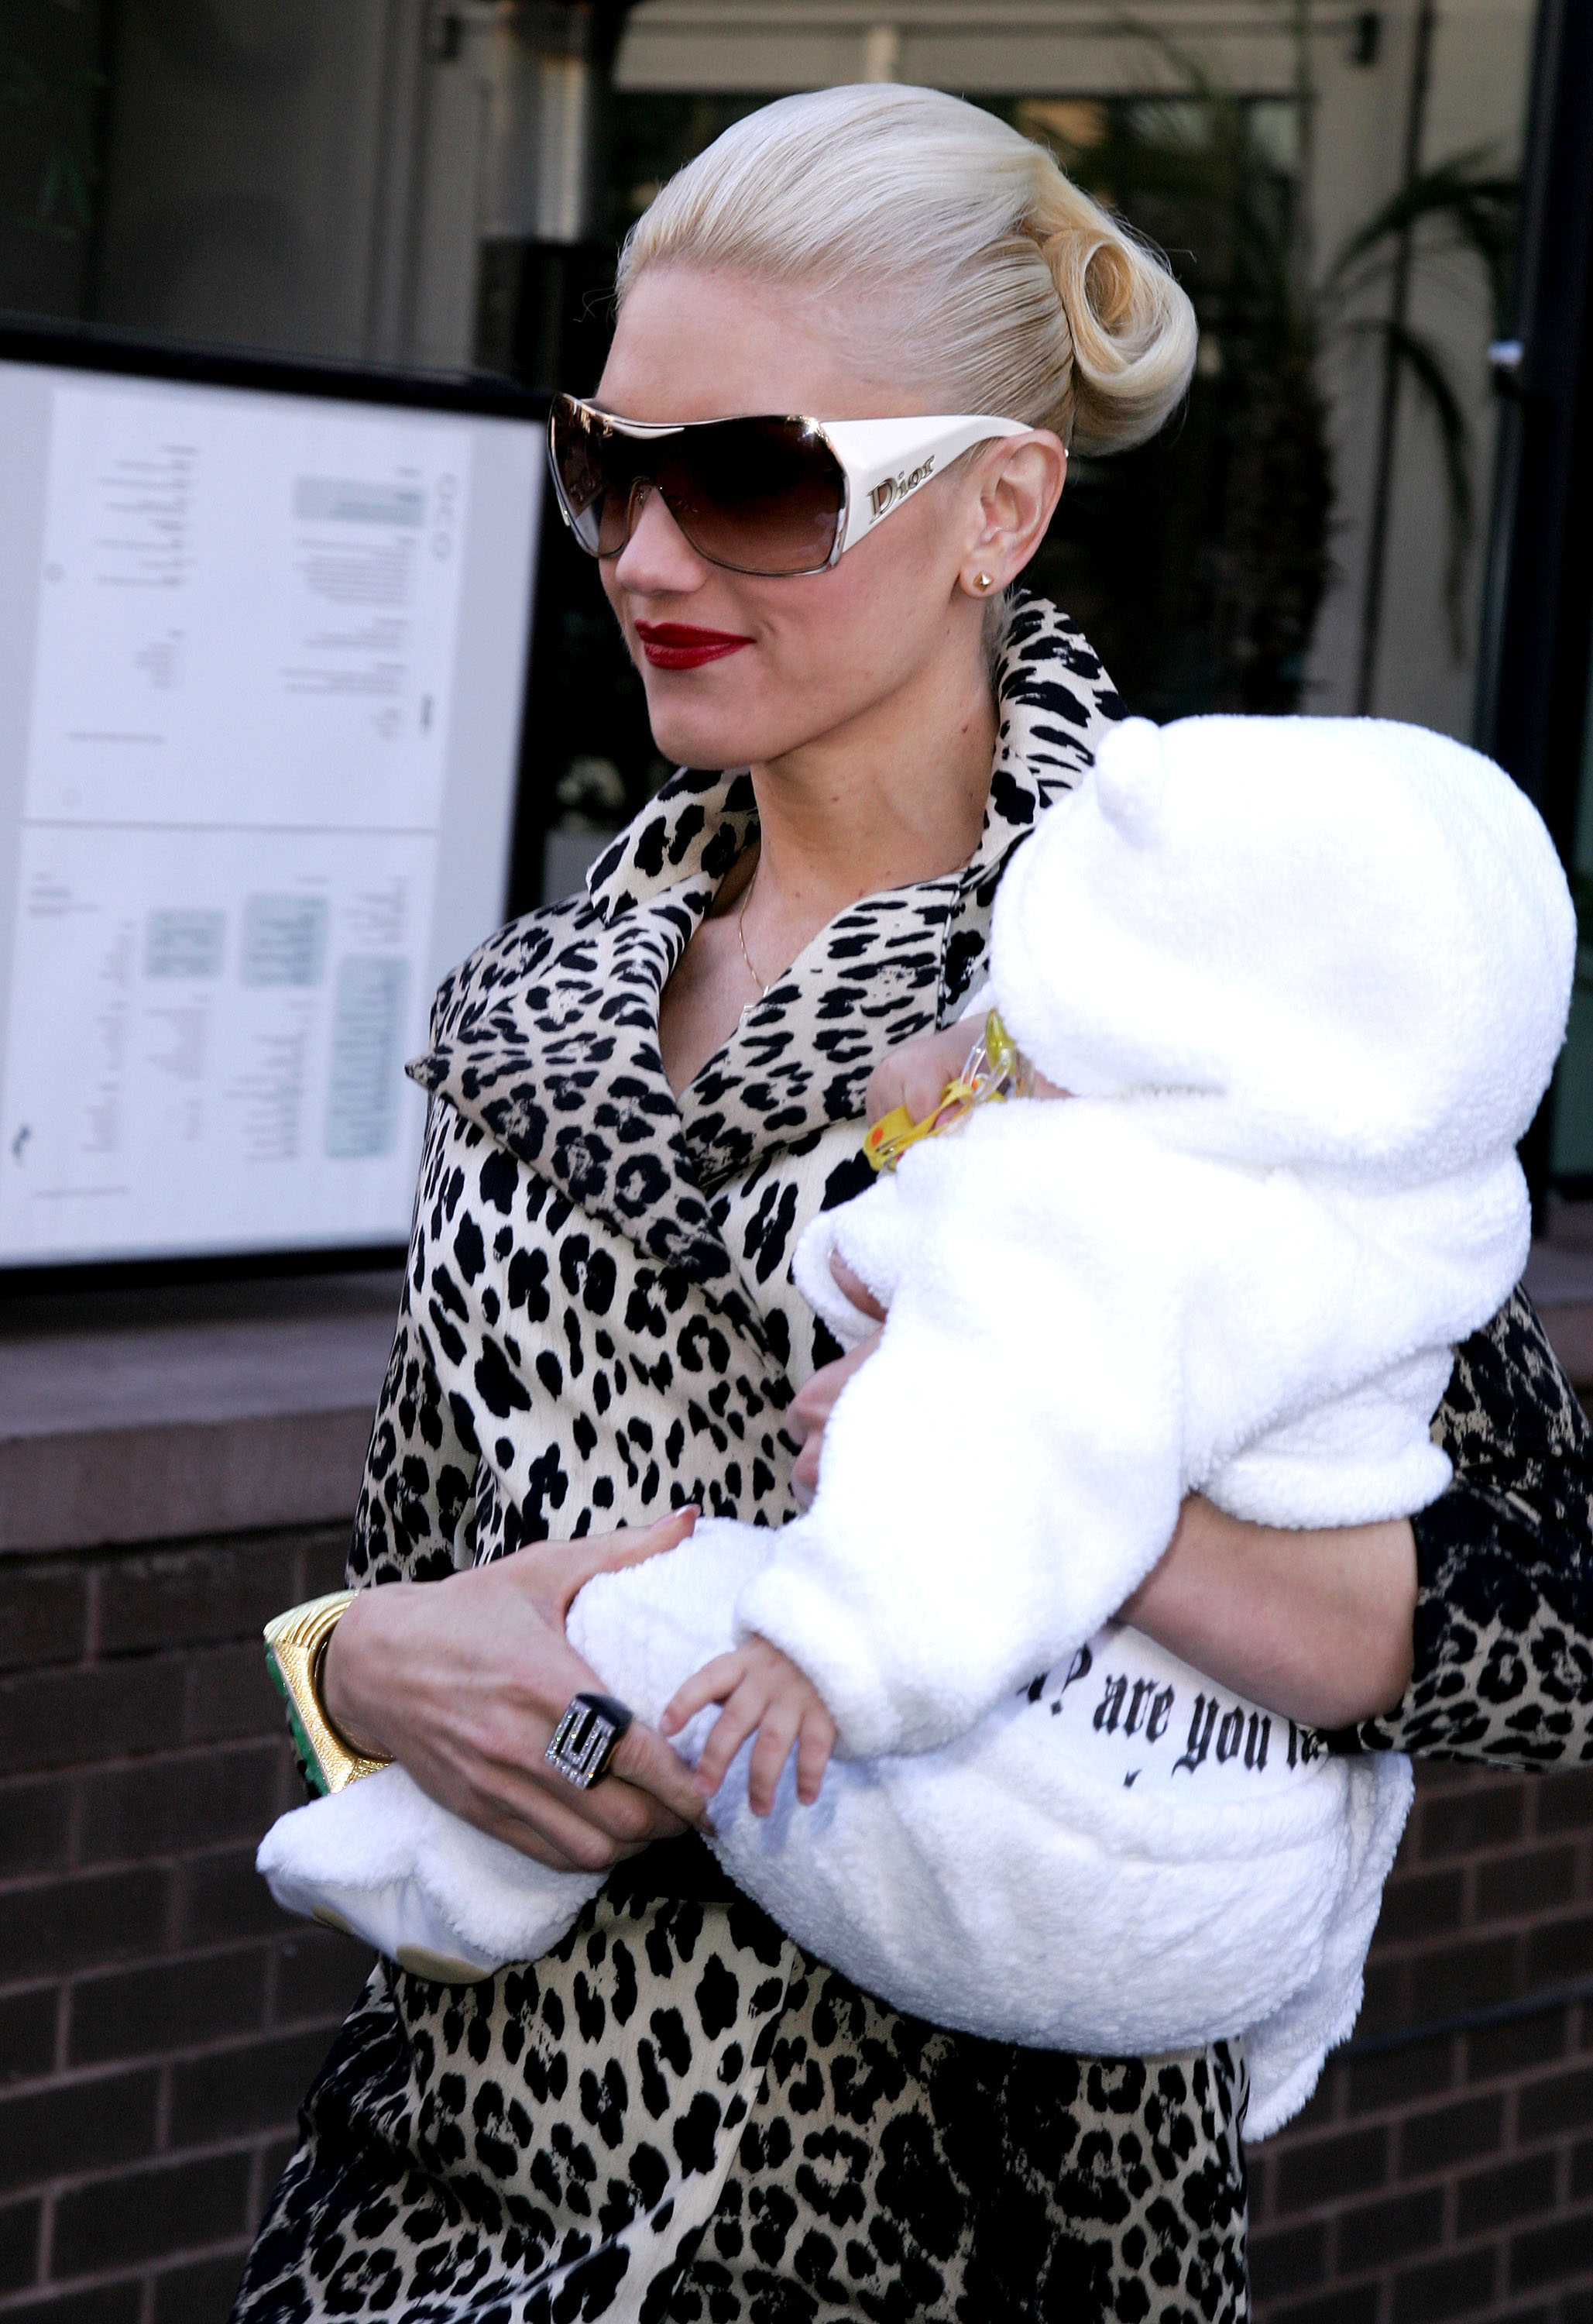 Gwen Stefani spotted with her son Kingston Rossdale on December 6, 2006, in New York City. | Source: Getty Images